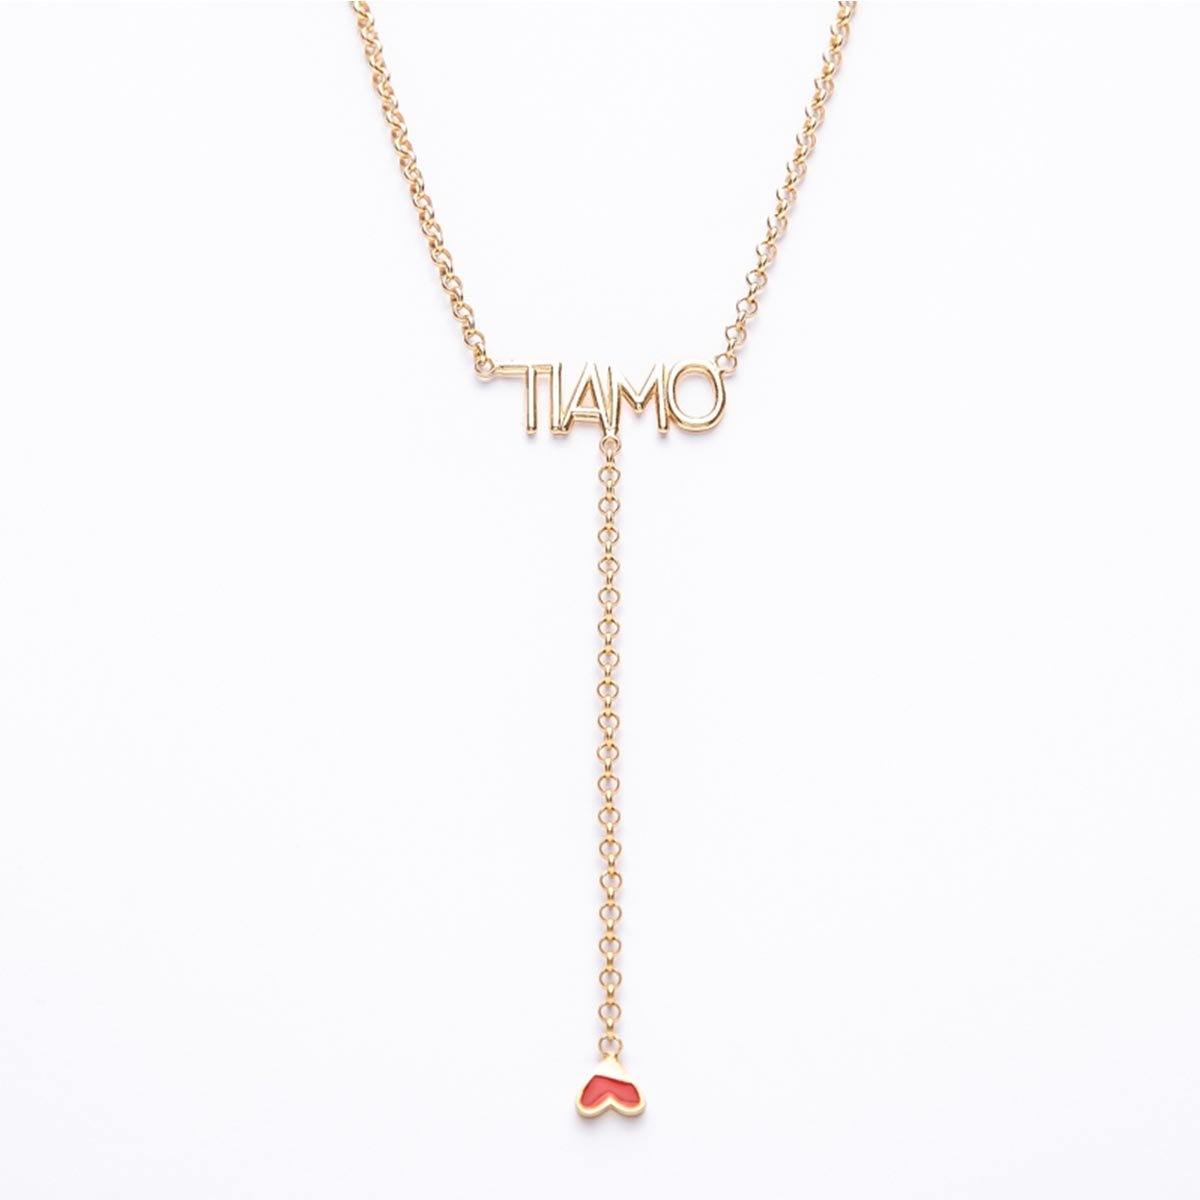 Ti Amo Gold Pendant with a Red Heart - Tanzire